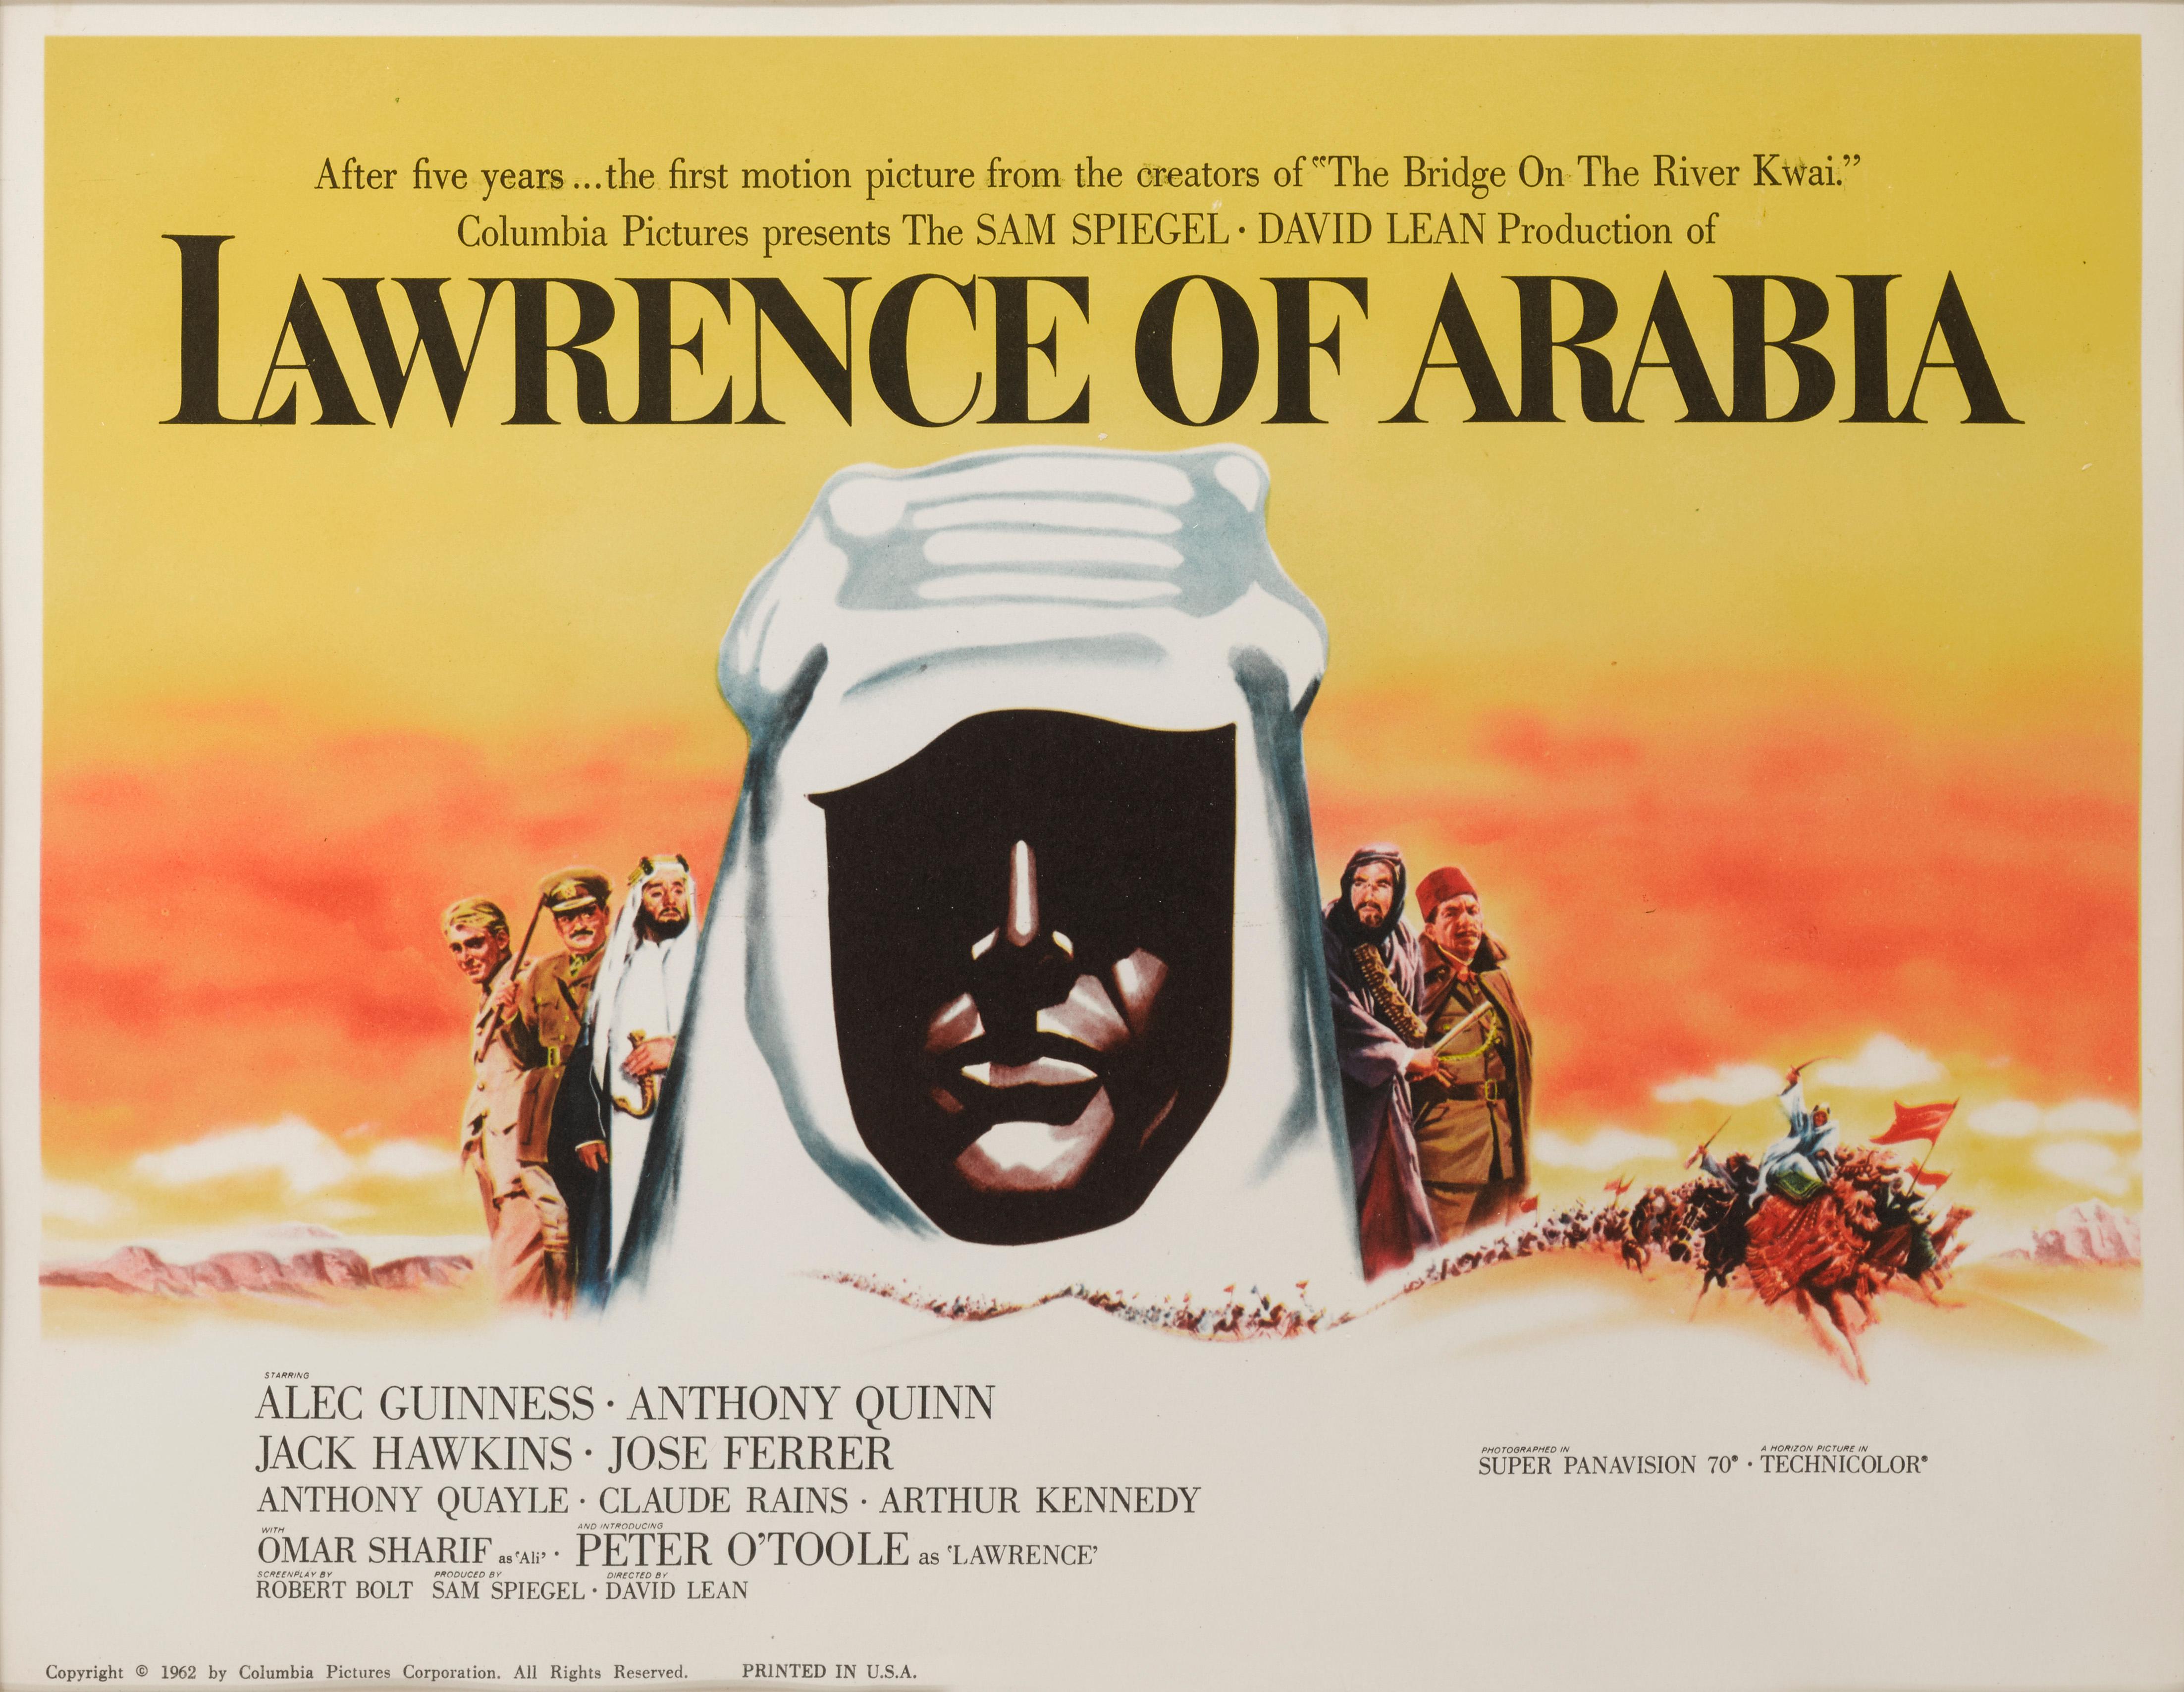 American Lawrence of Arabia For Sale